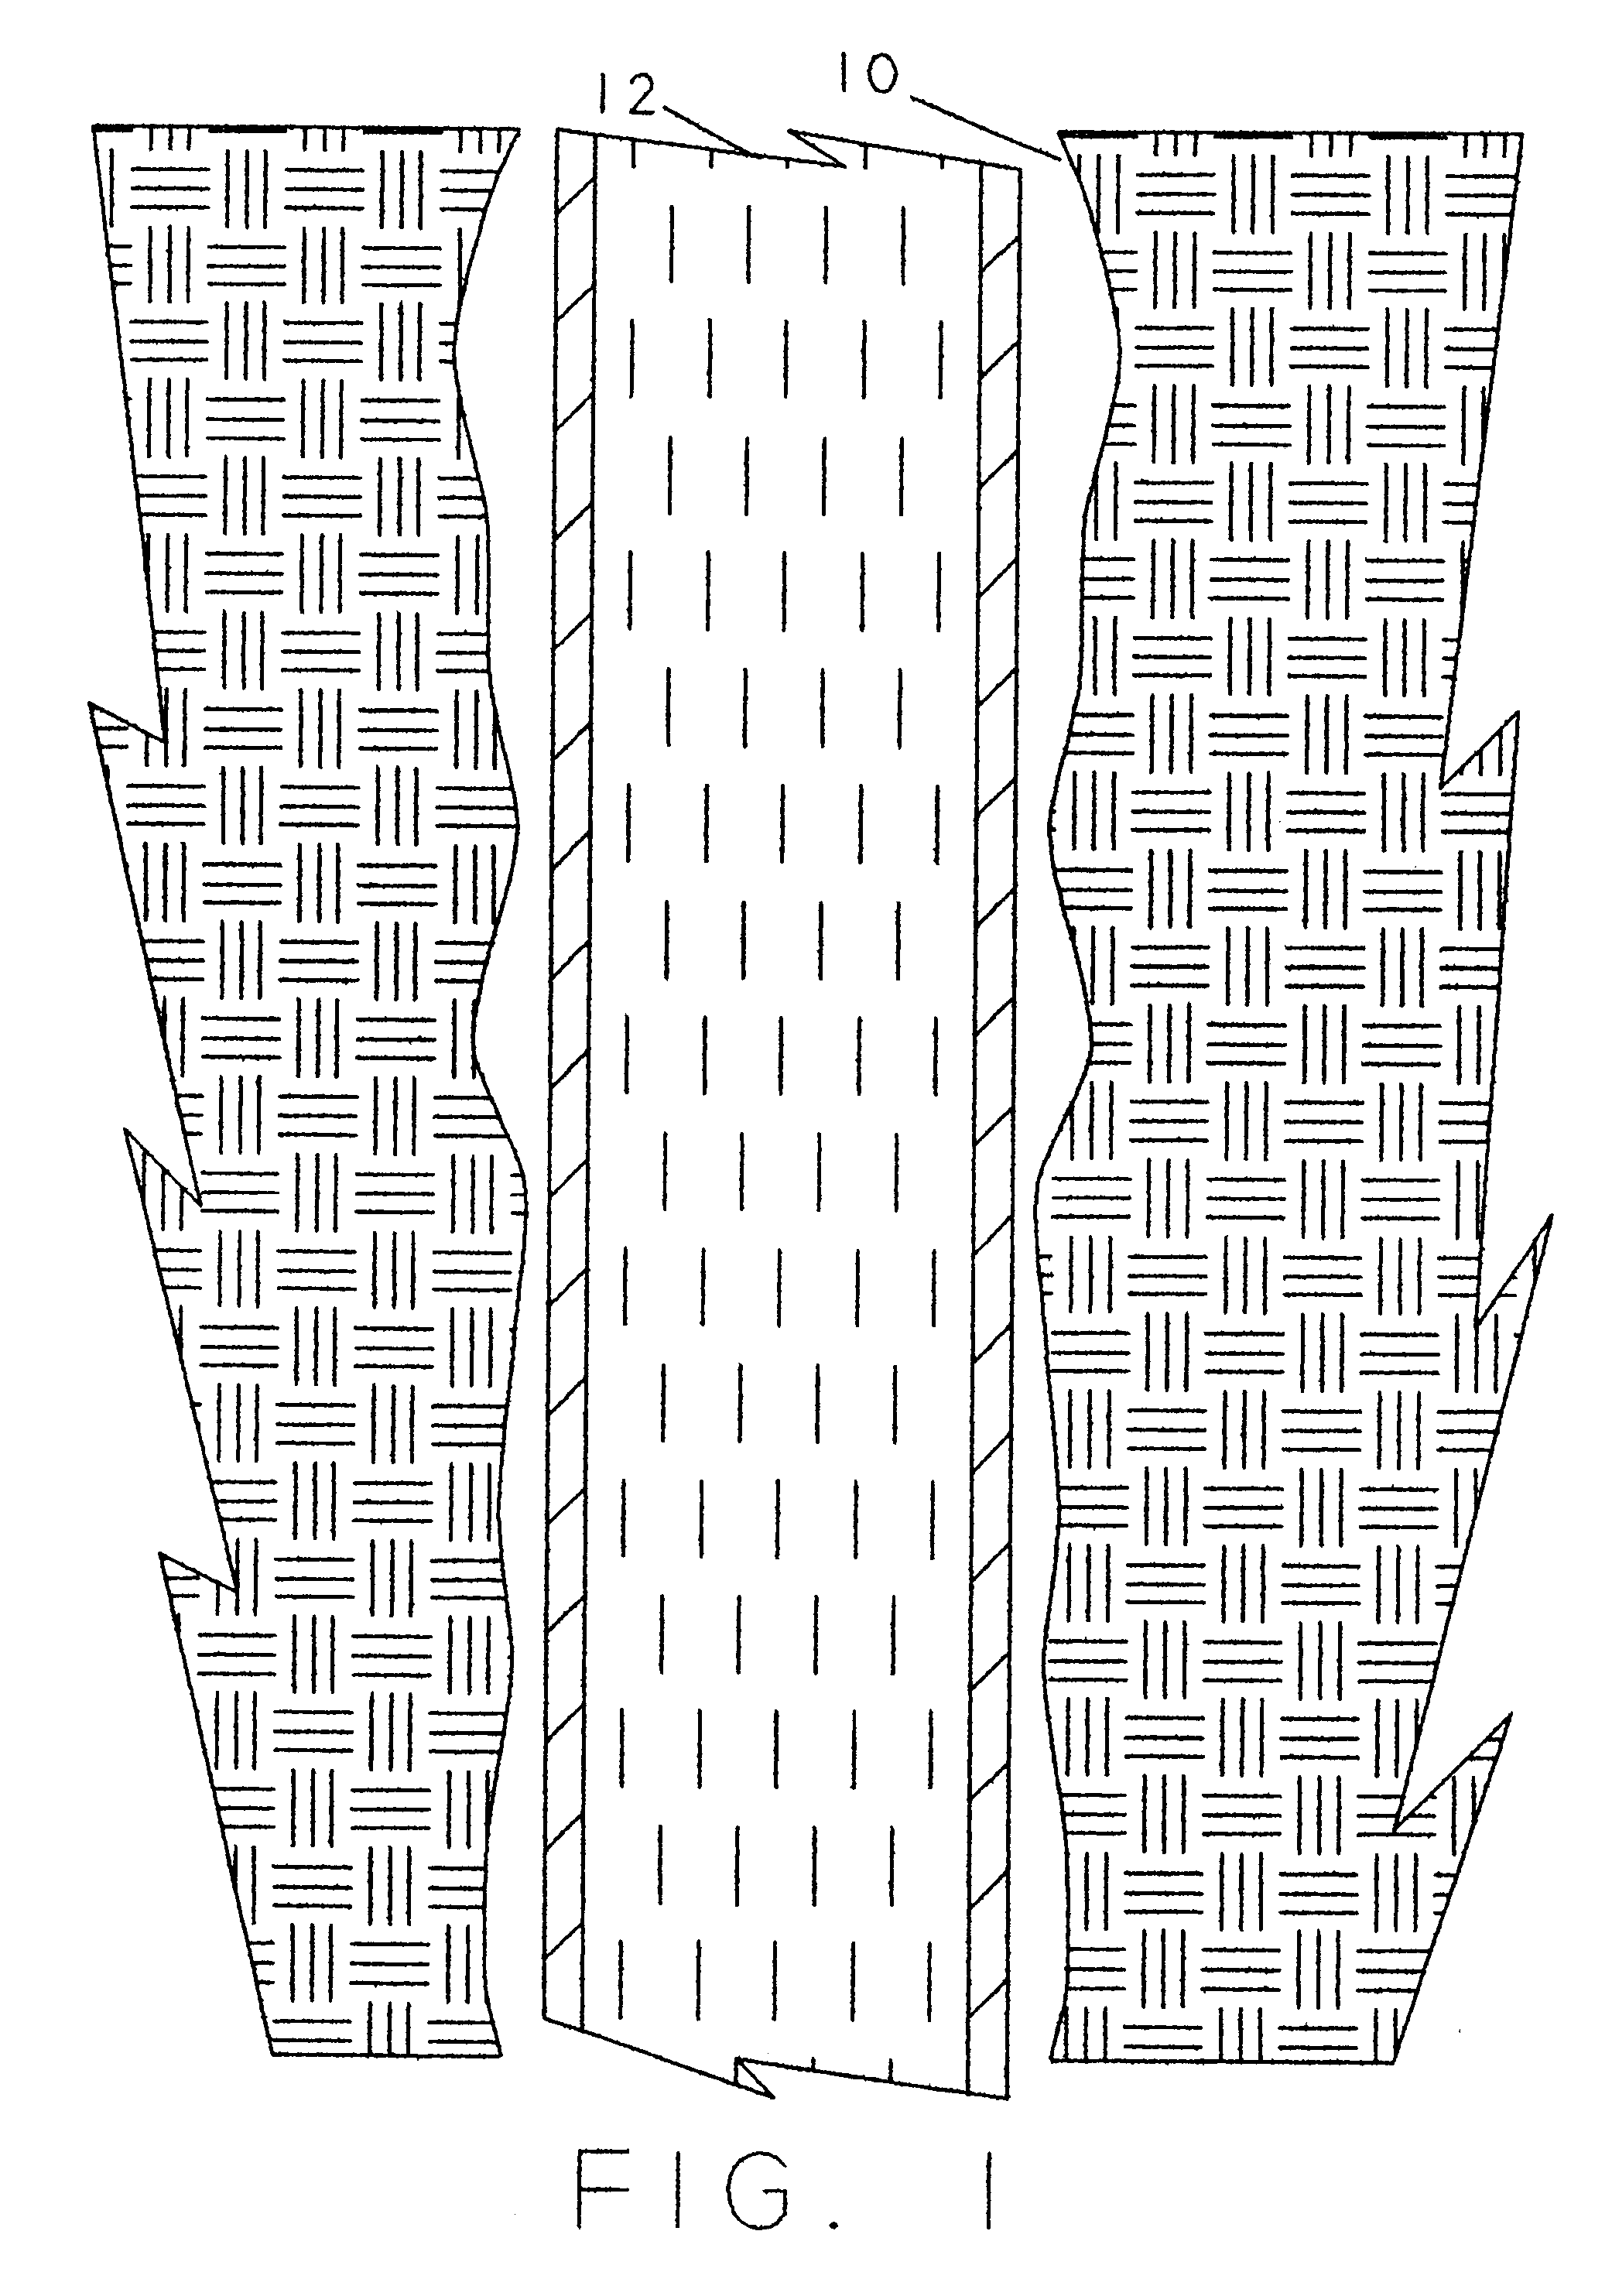 Selective zonal isolation within a slotted liner